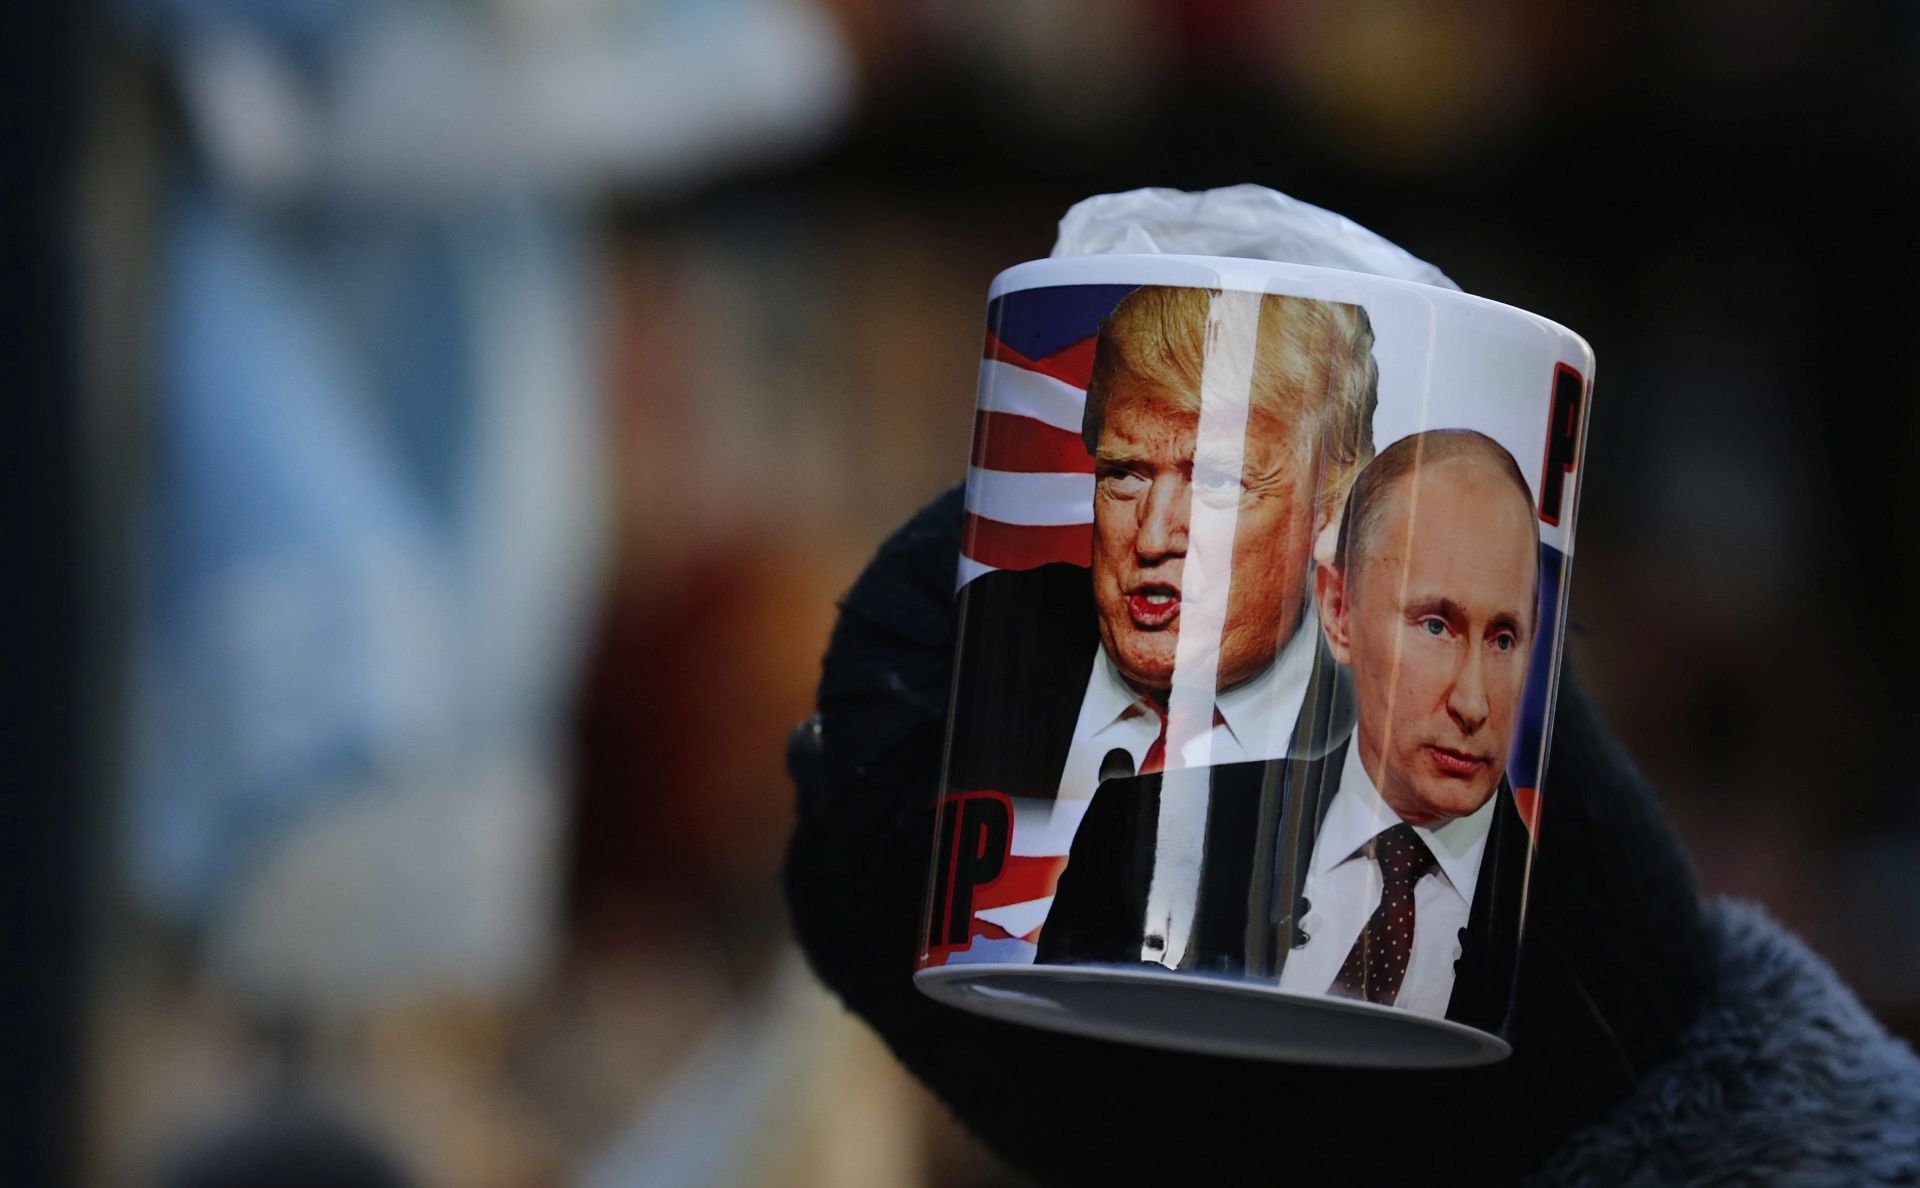 epa05734373 A mug depicting Donald Trump and Russian President Vladimir Putin on sale several hours before Donald J. Trump is sworn in as the 45th President of the United States, at a souvenir street shop in St. Petersburg, Russia, 20 January 2017. Trump won the 08 November 2016 election to become the next US President.  EPA/ANATOLY MALTSEV